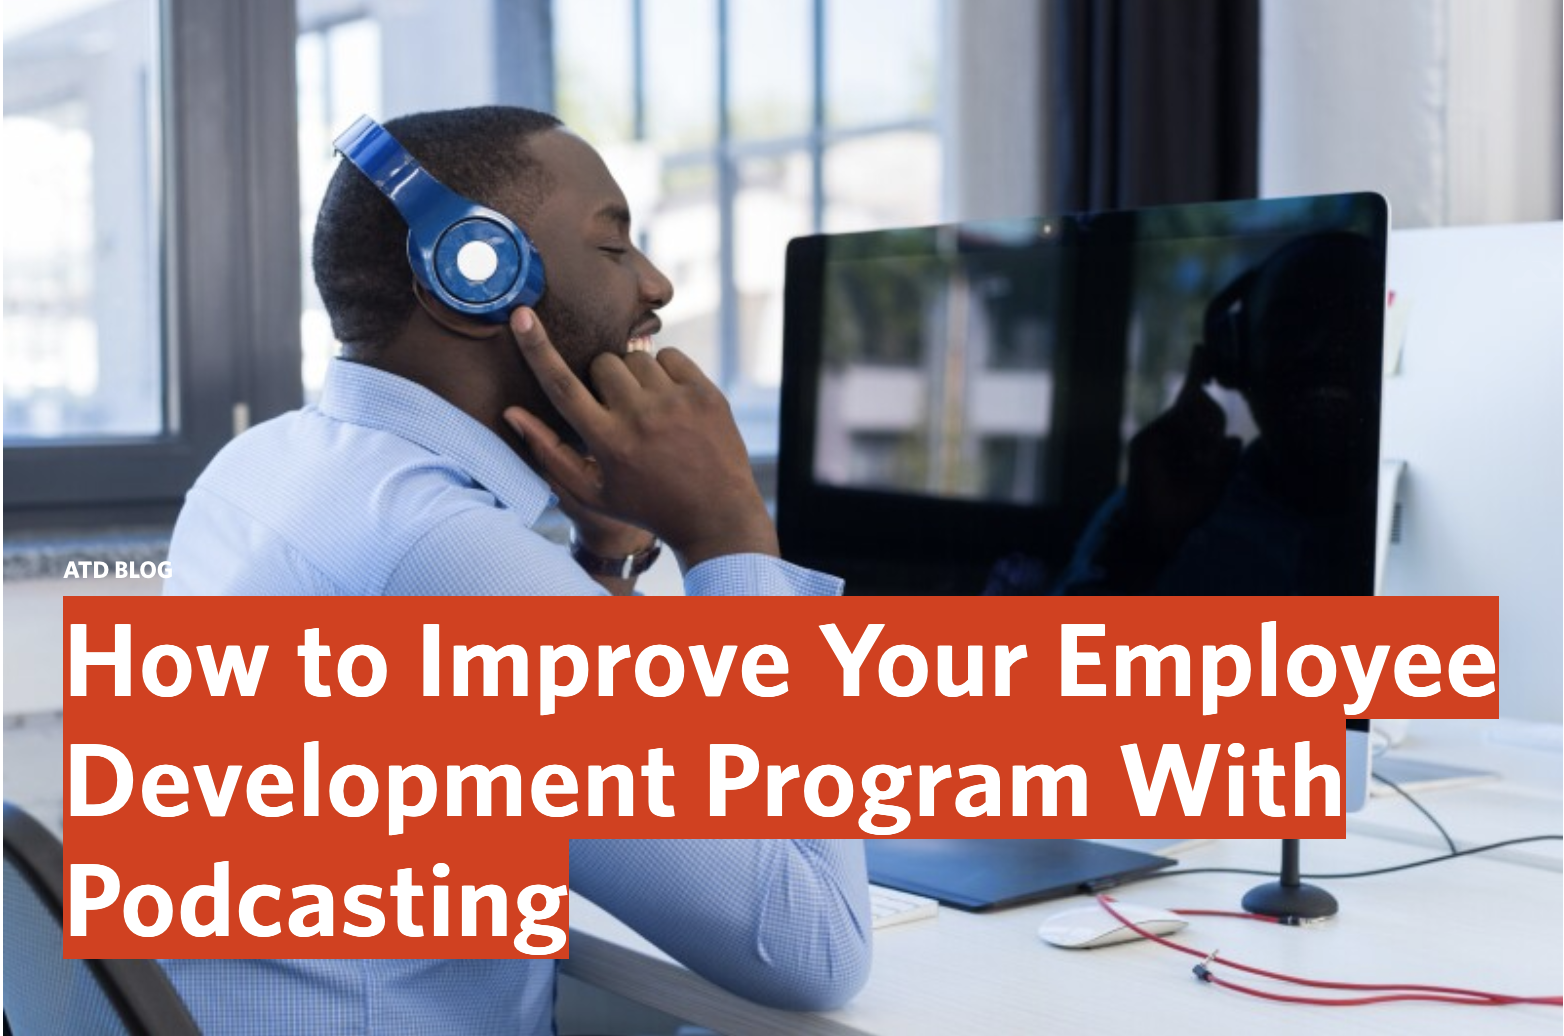 How to improve your employee development with Podcasting